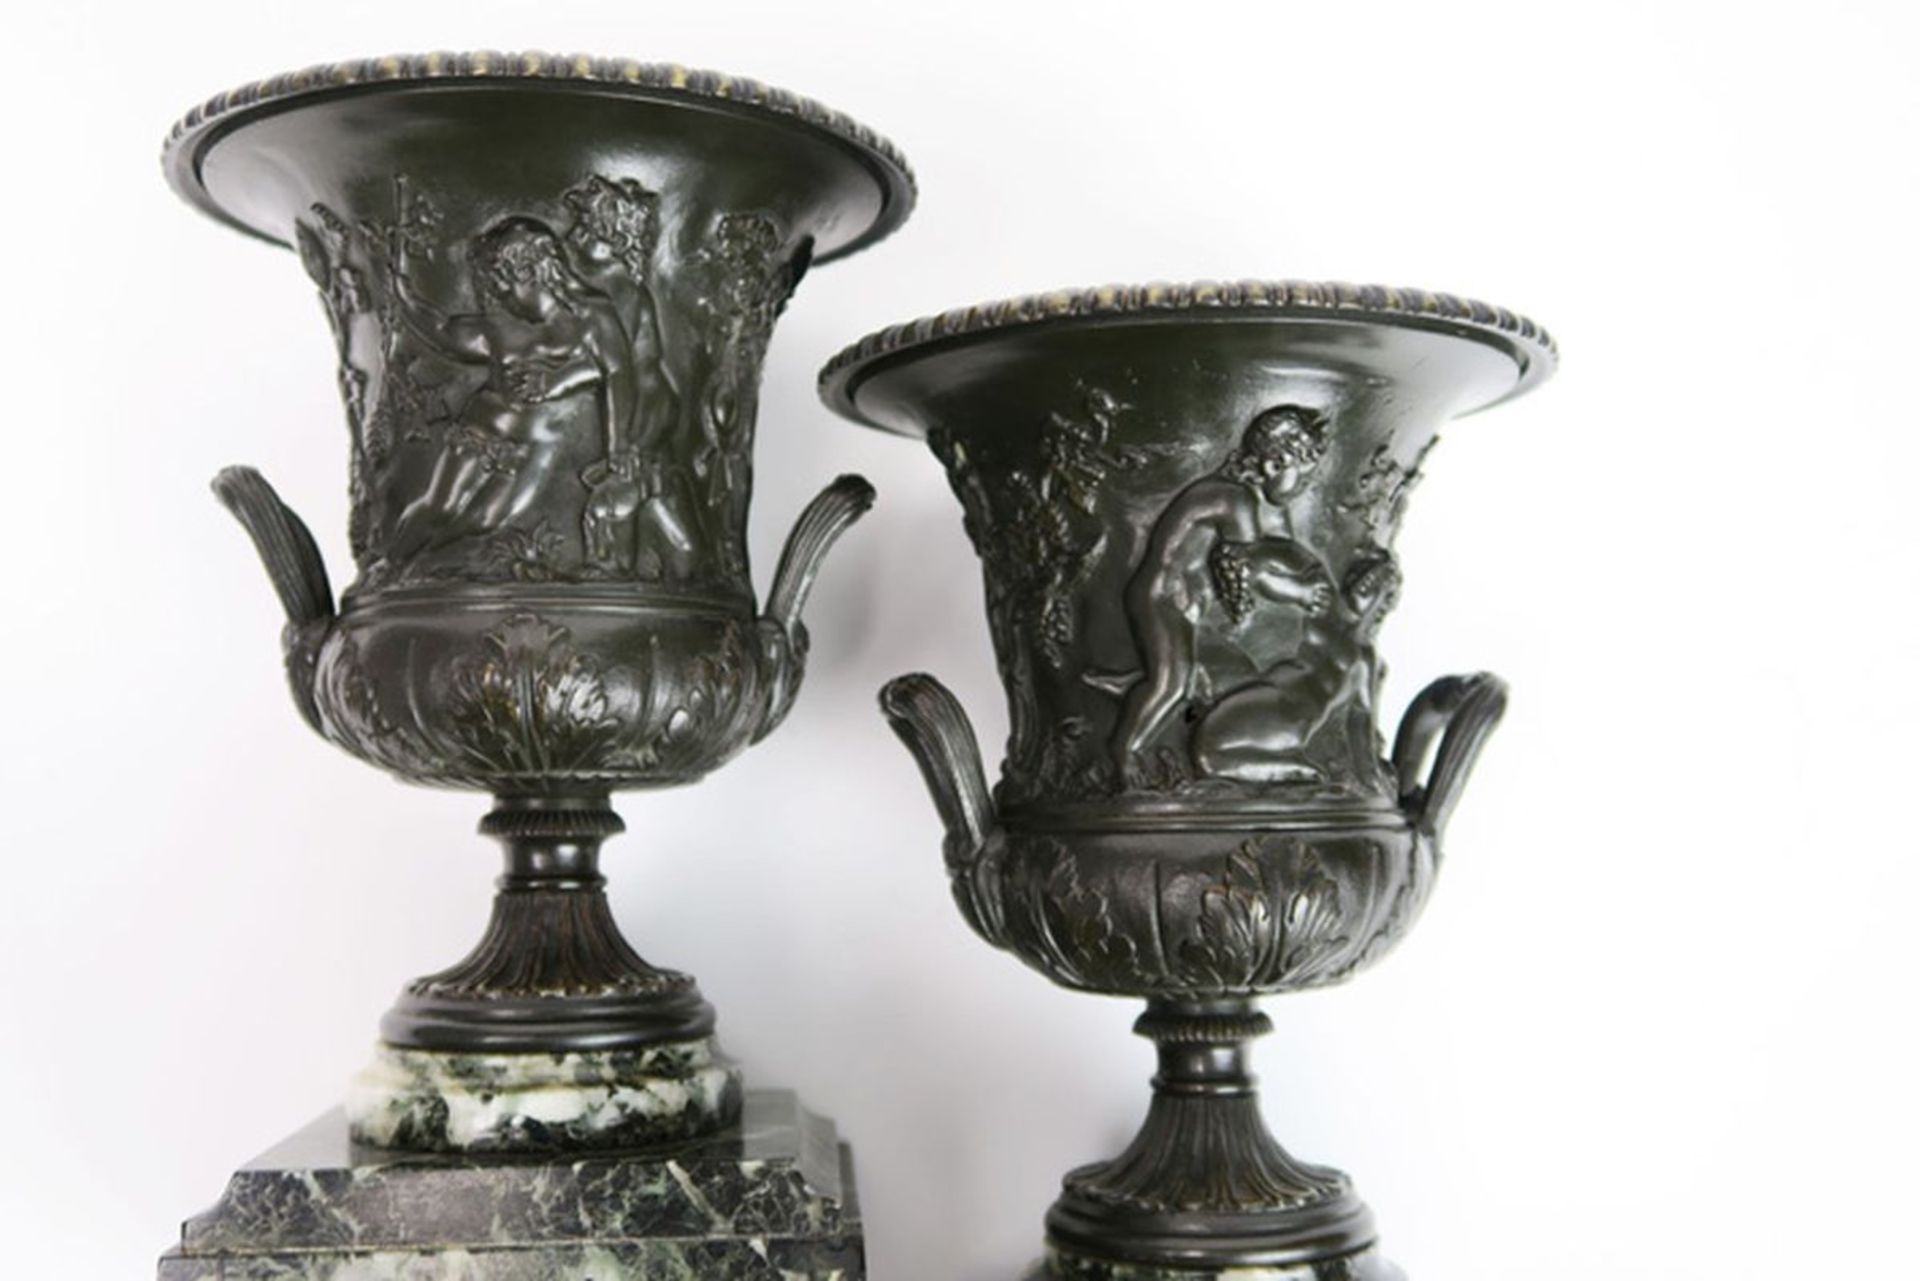 pair of 19th Cent. urns, so called "Louvre"-vases, in bronze on a green marble base [...] - Image 3 of 3